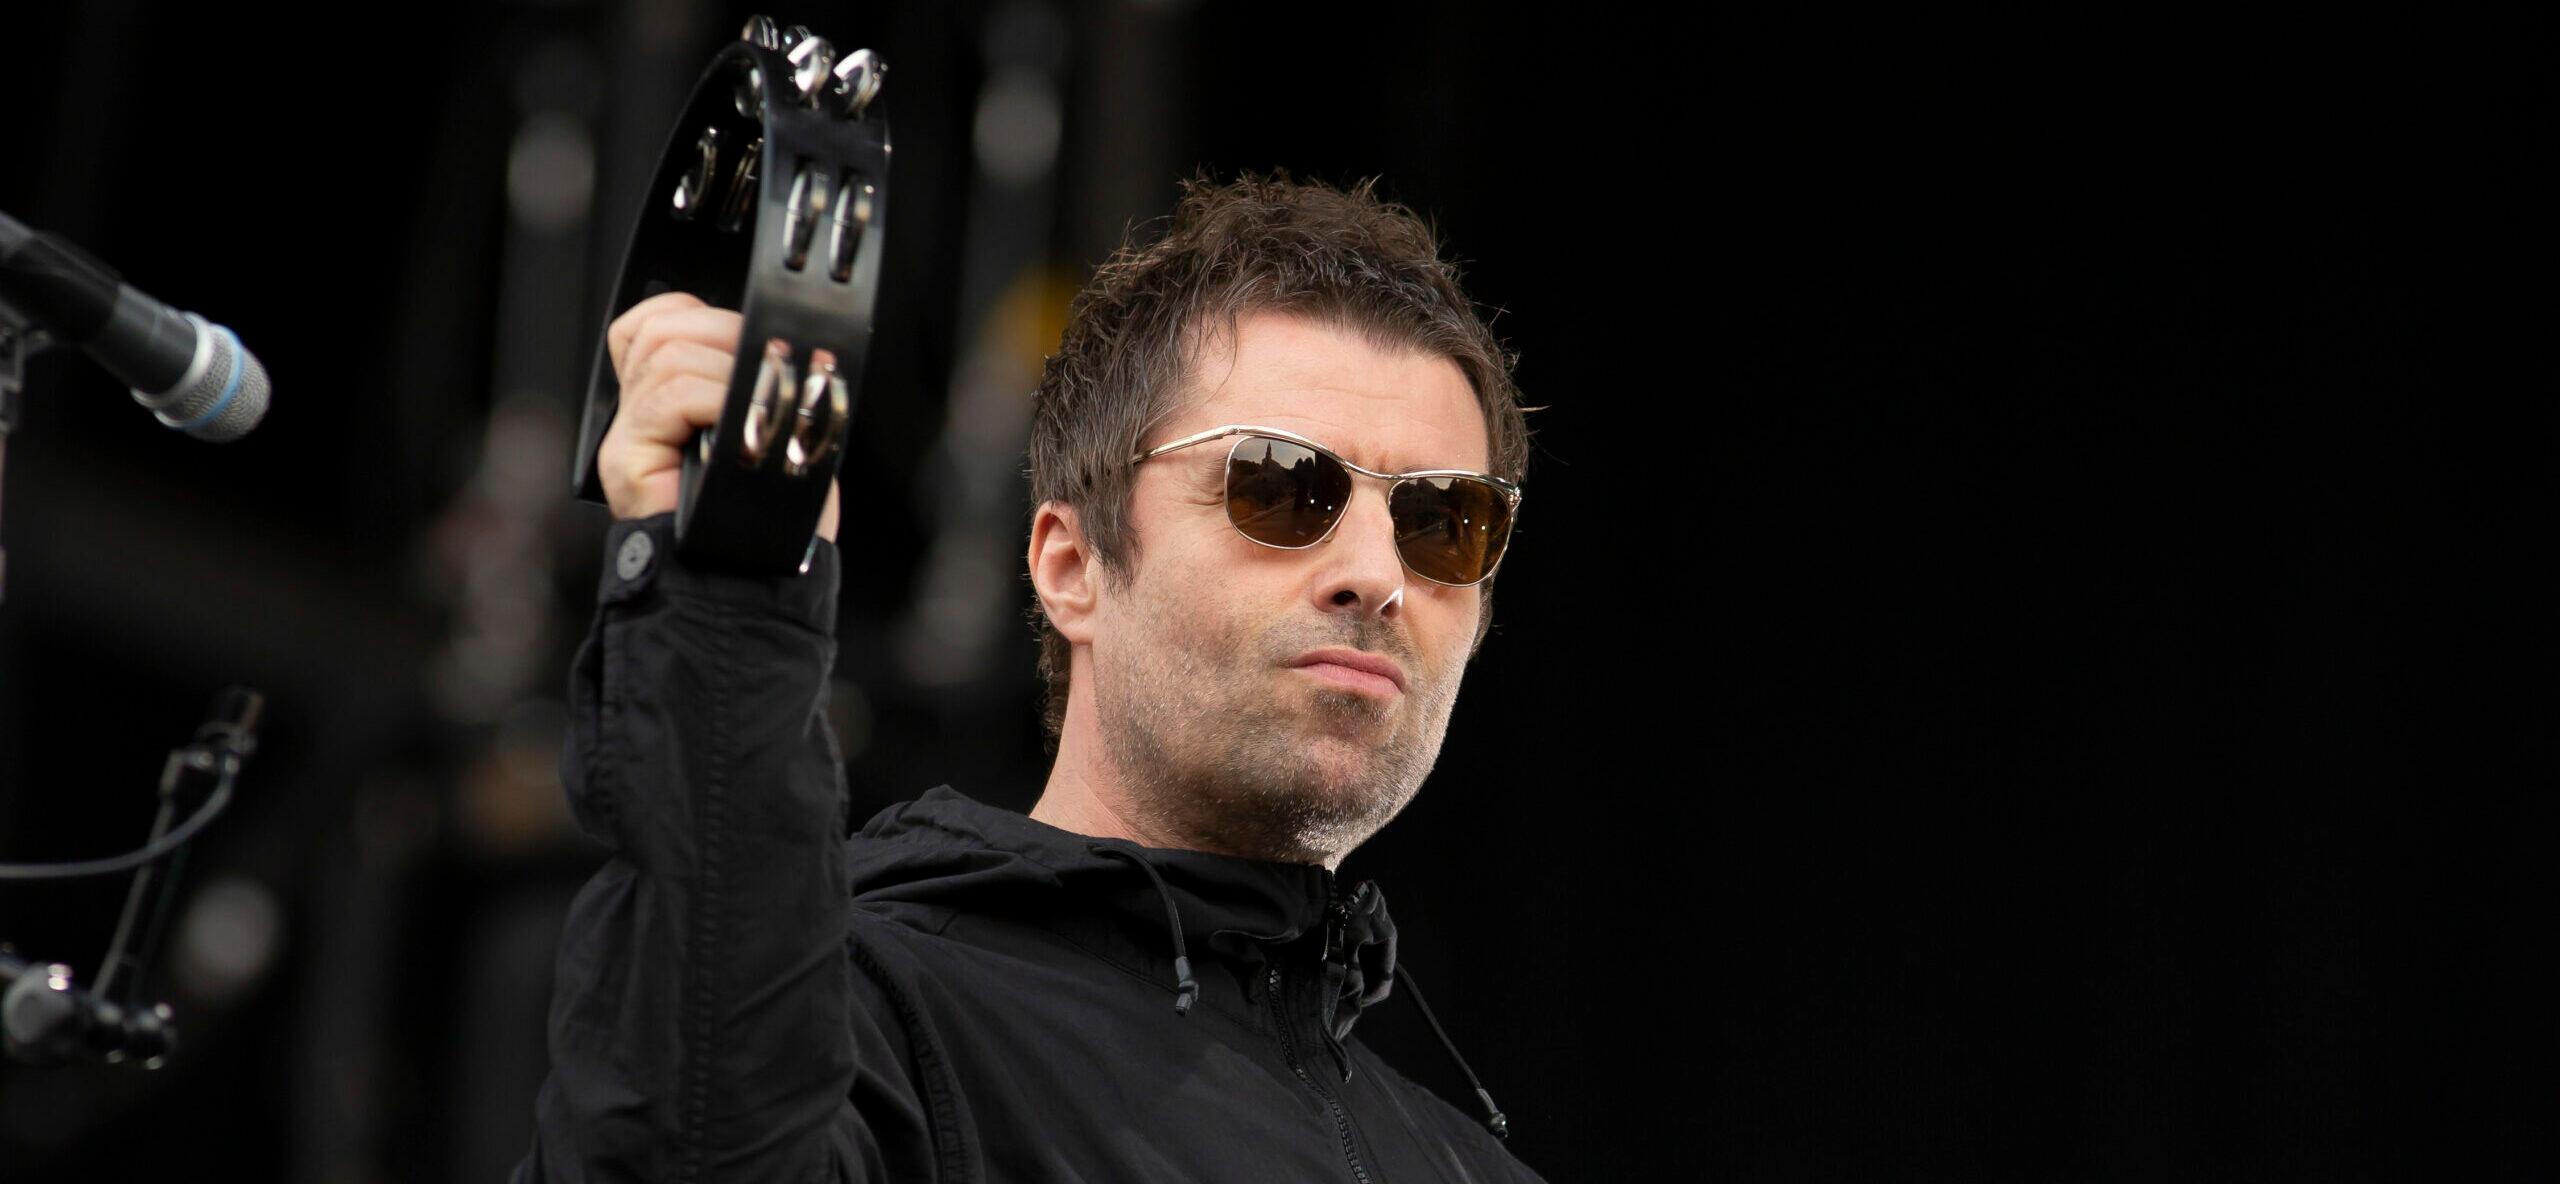 Liam Gallagher sing and plays during the Main square music festival